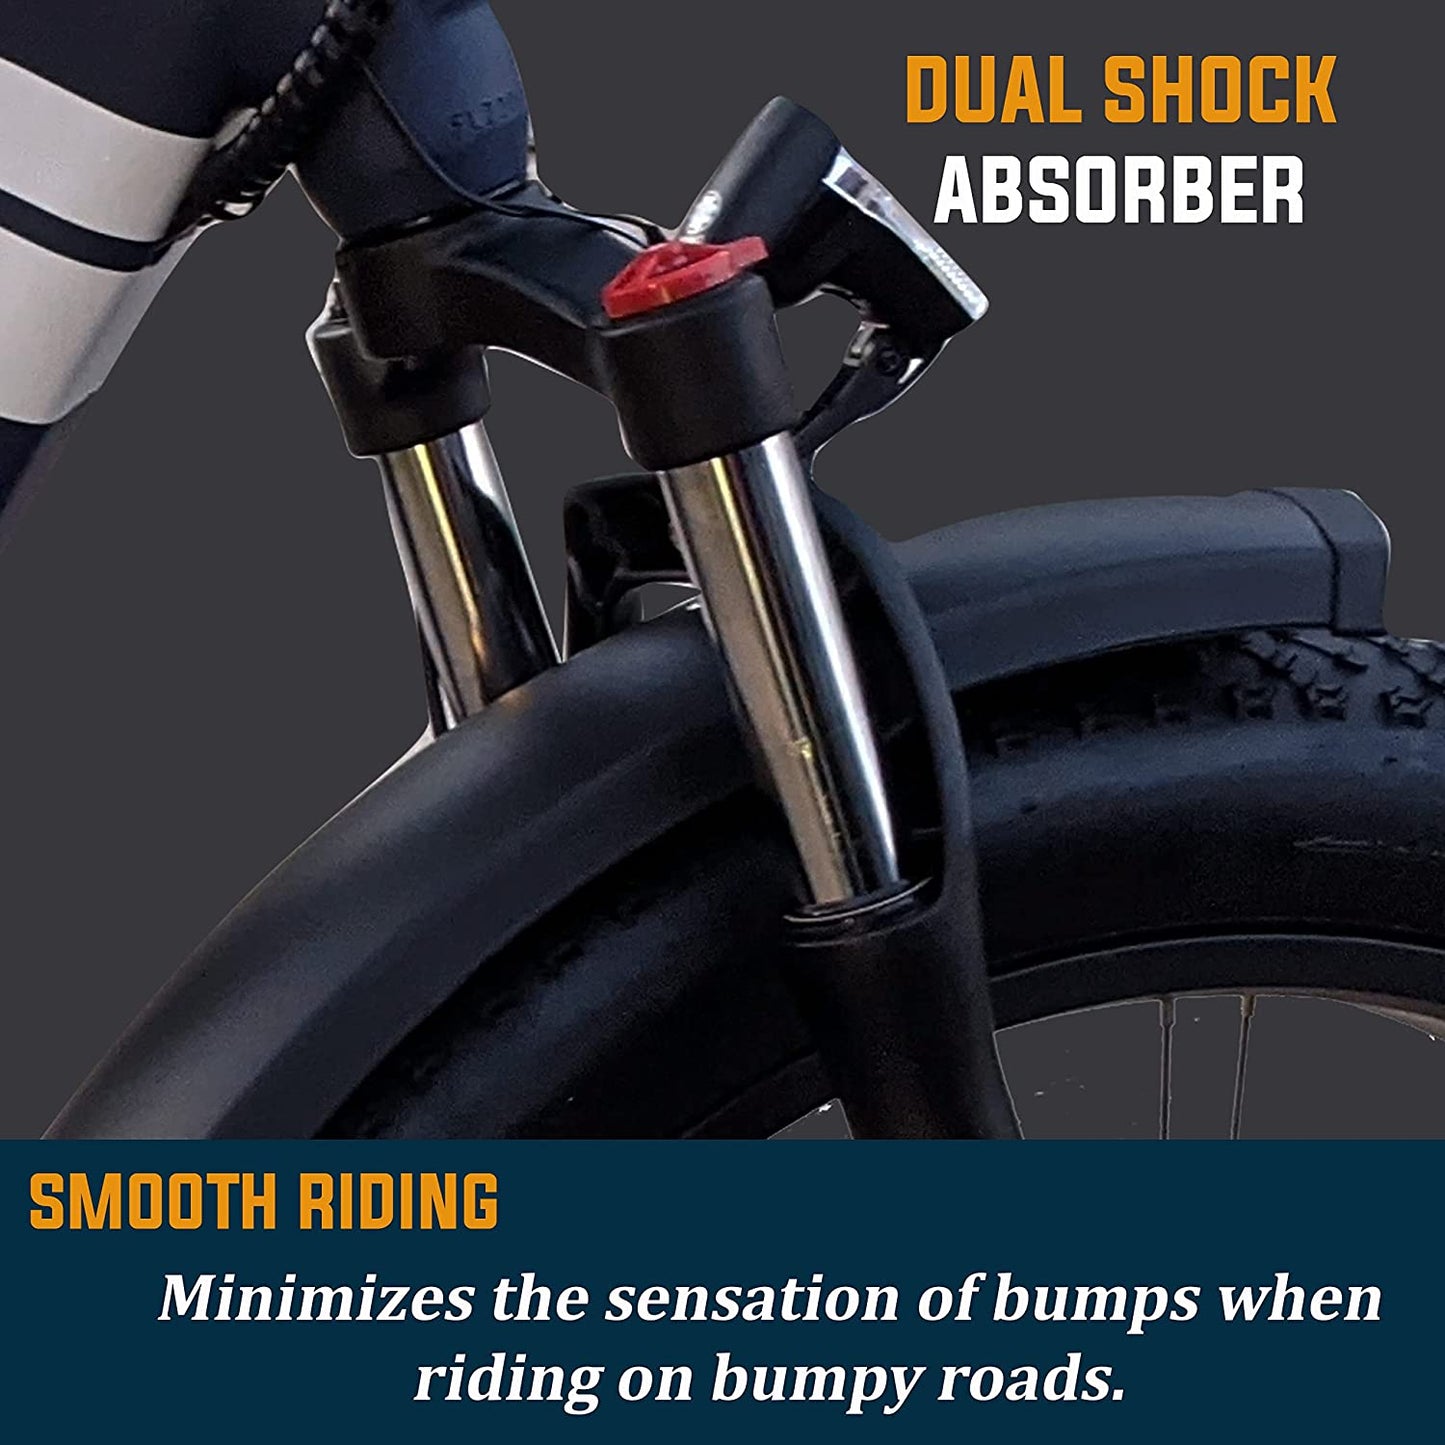 ZOOM Suspension for a Comfortable Ride